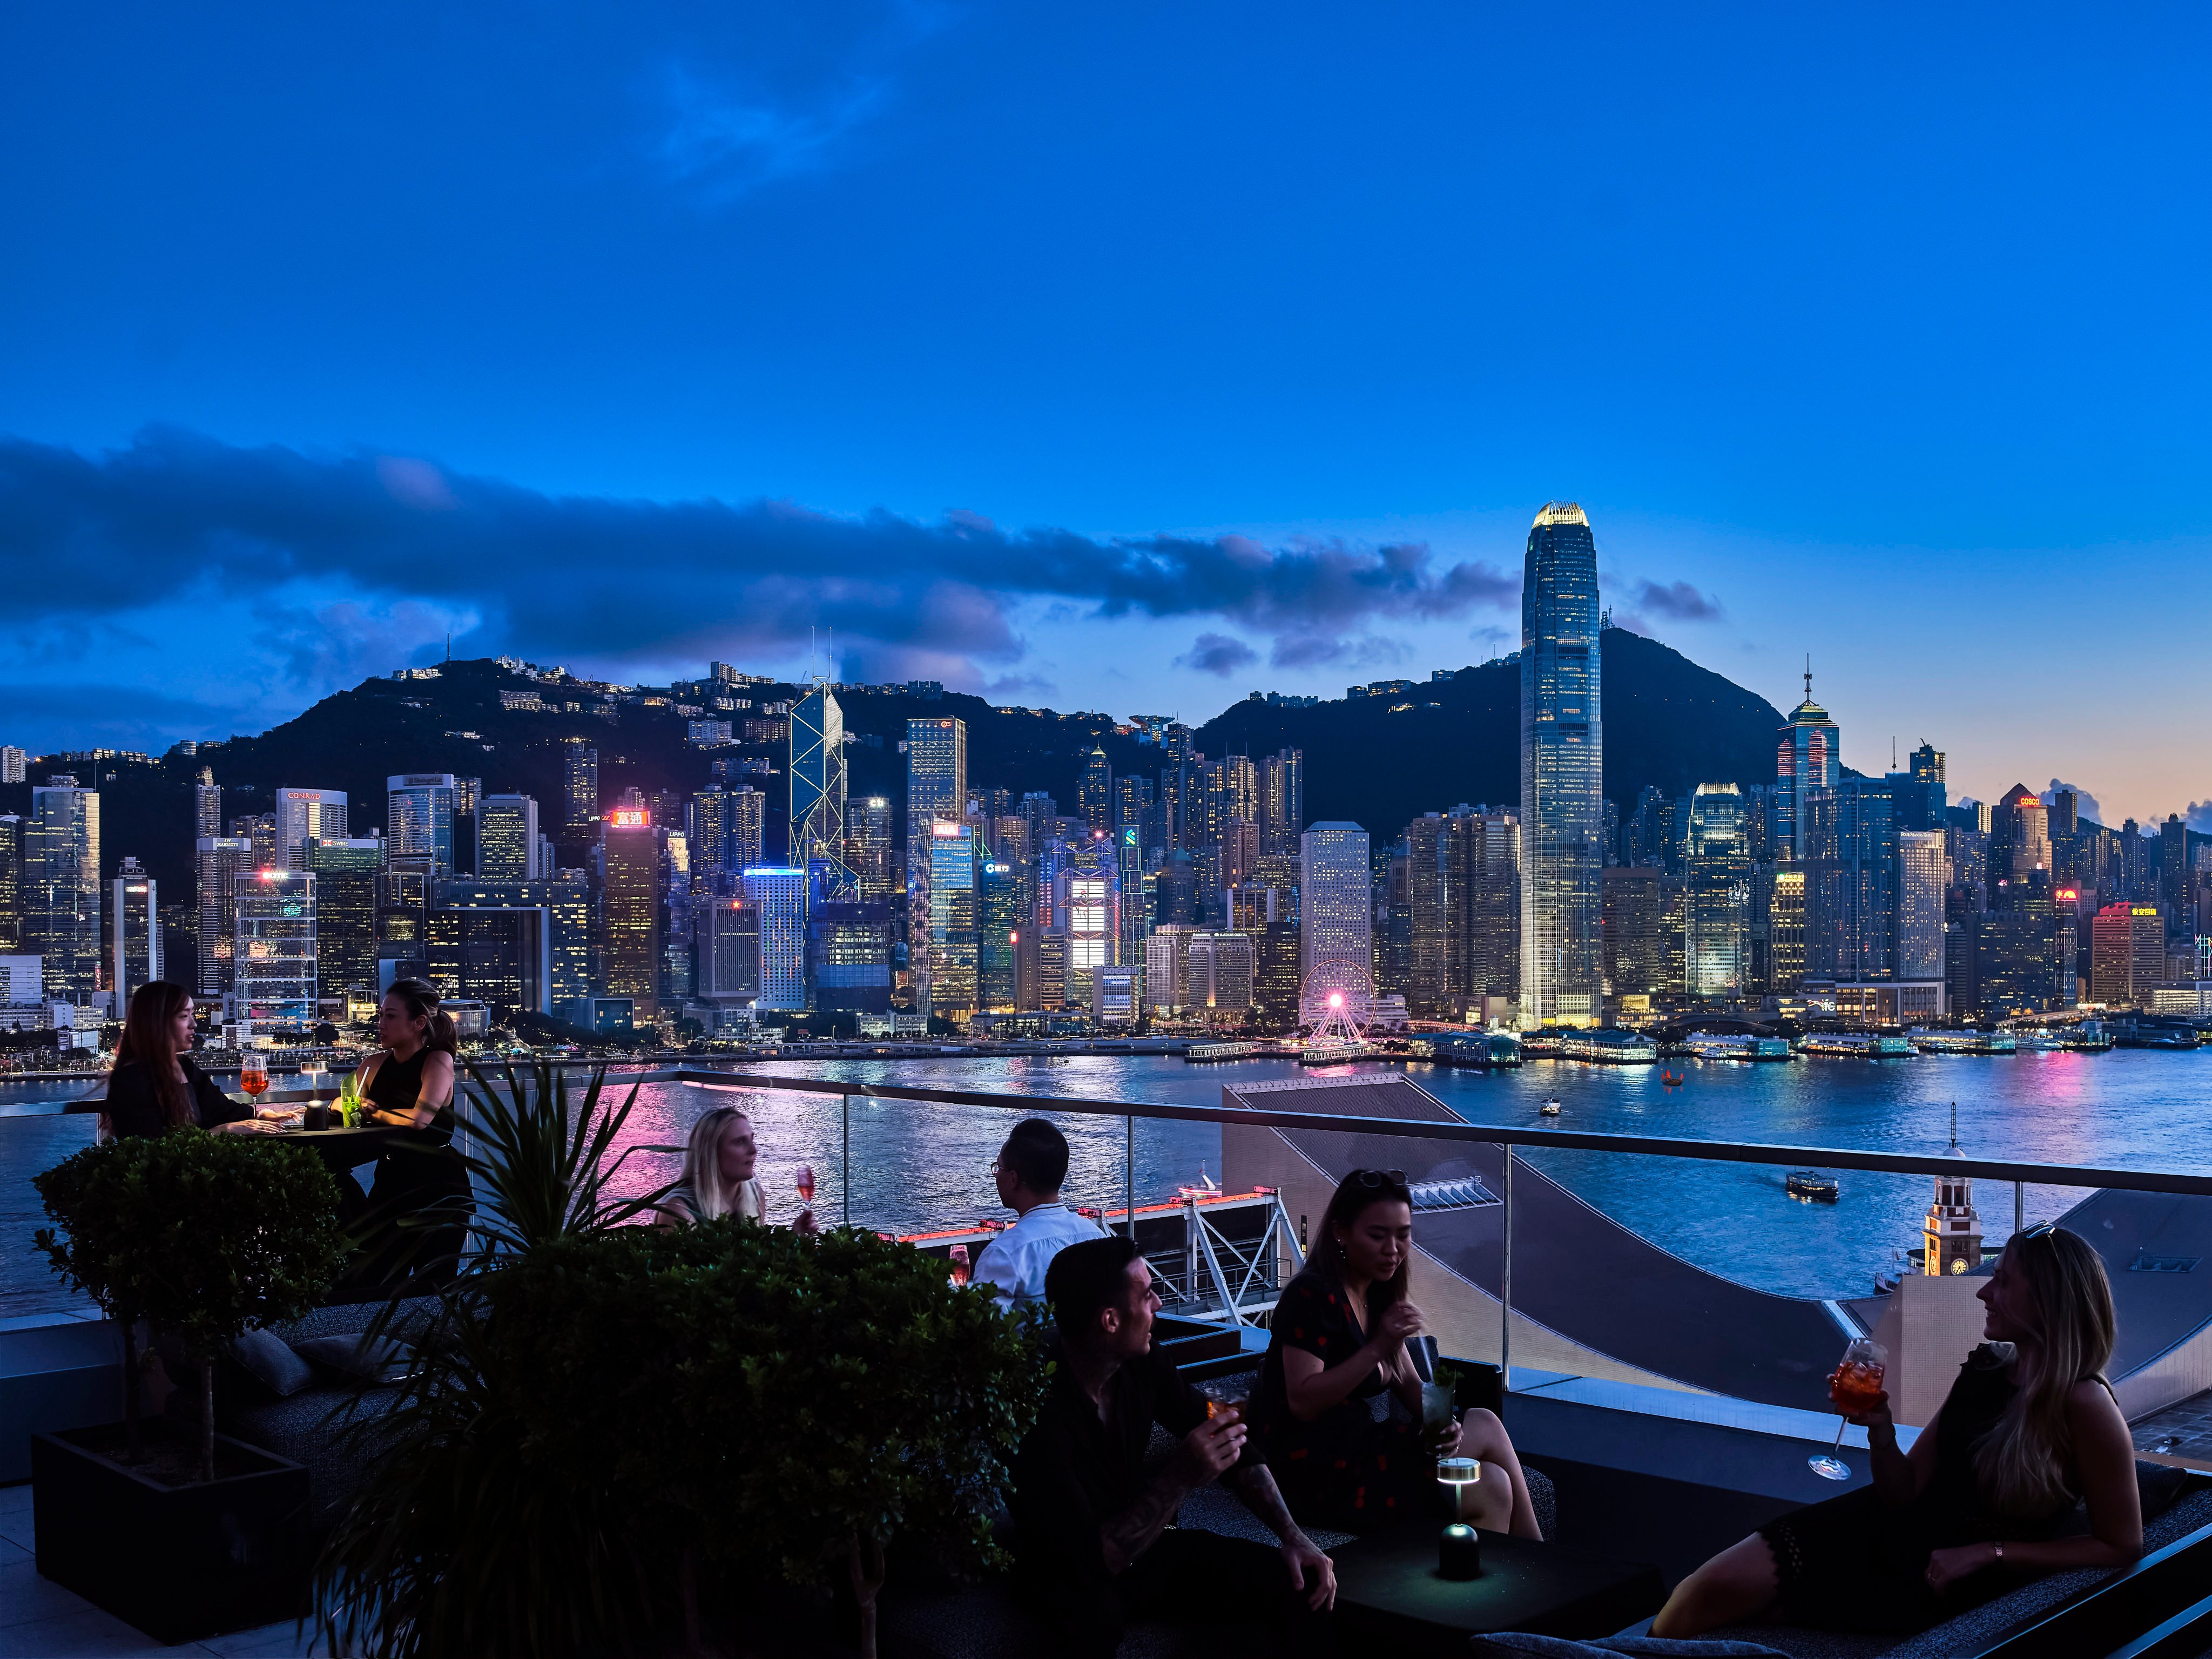 Diners enjoy drinks with views of the city skyline from the terrace at Aqua, one of many Hong Kong restaurants enticing diners with seasonal promotions this summer. Photo: Handout